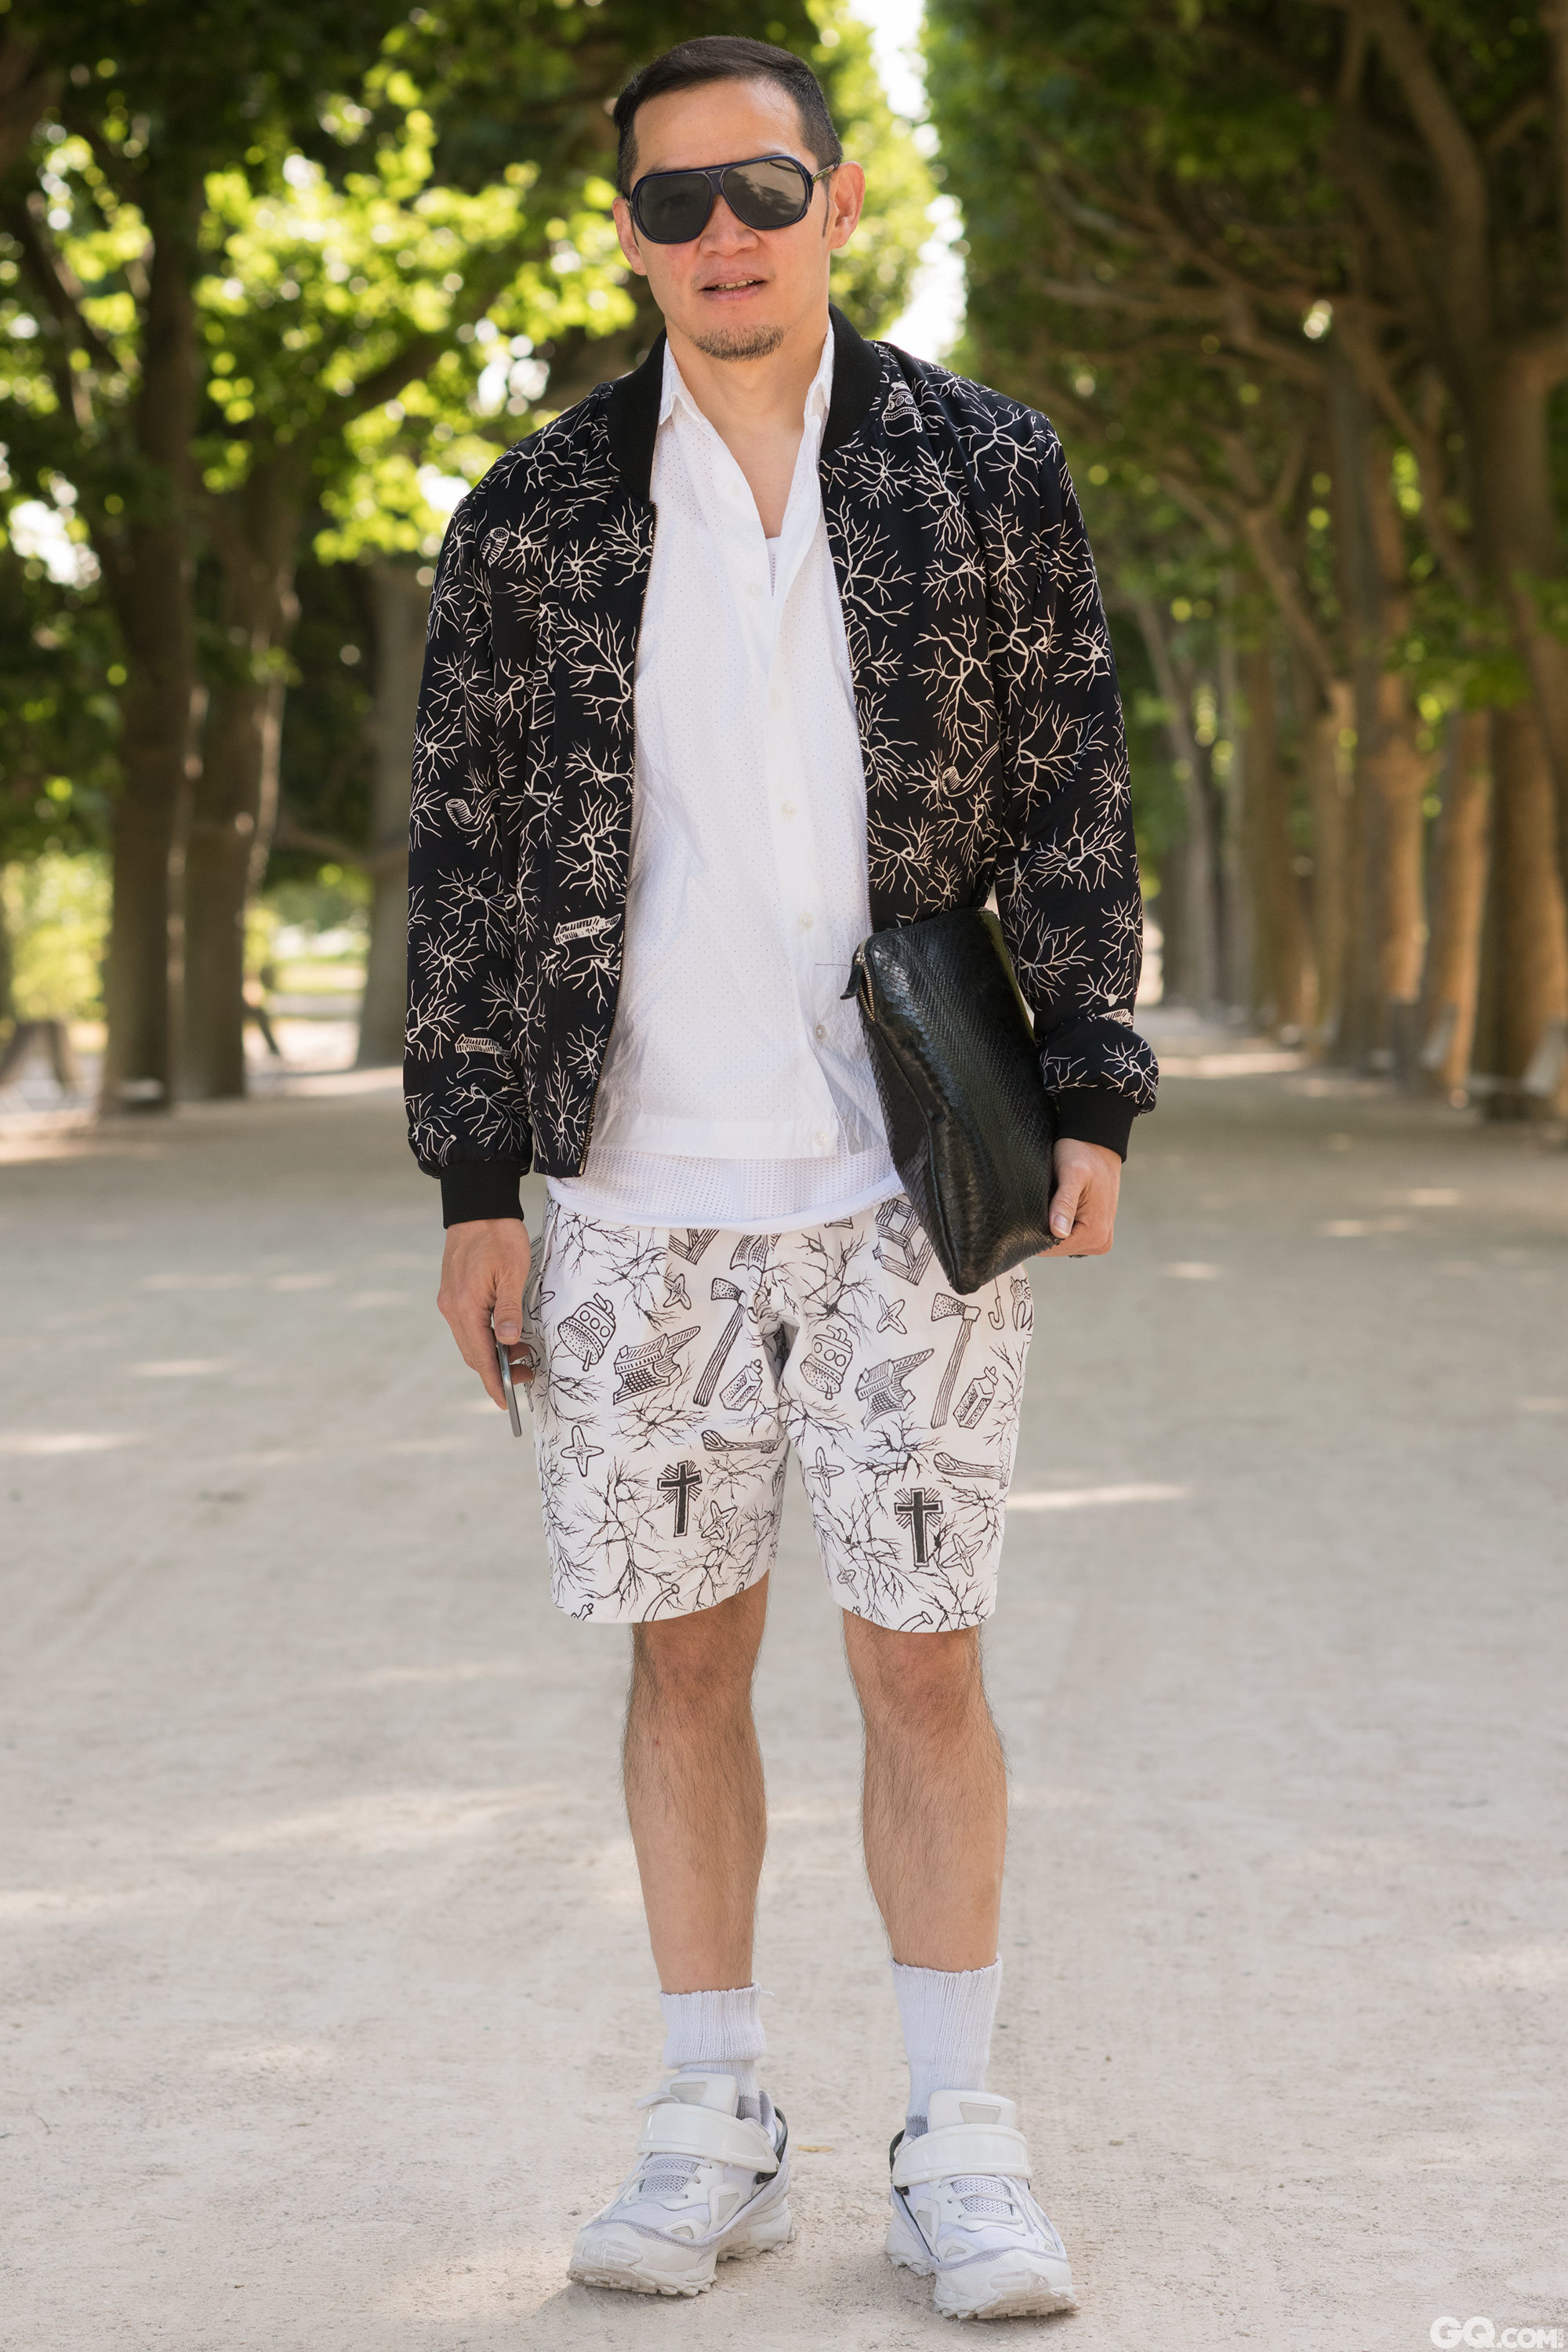 Sunglasses: Raf Simons
Jacket: Populo Batik
Shirt: Collard
Jeans: Populo Batik
Shoes: Raf Simons
Bag: Populo Batik

Inspiration: Something with a lot of white because supposedly it’s going to be hot today. 
（白色元素很多因为今天可能会很热）